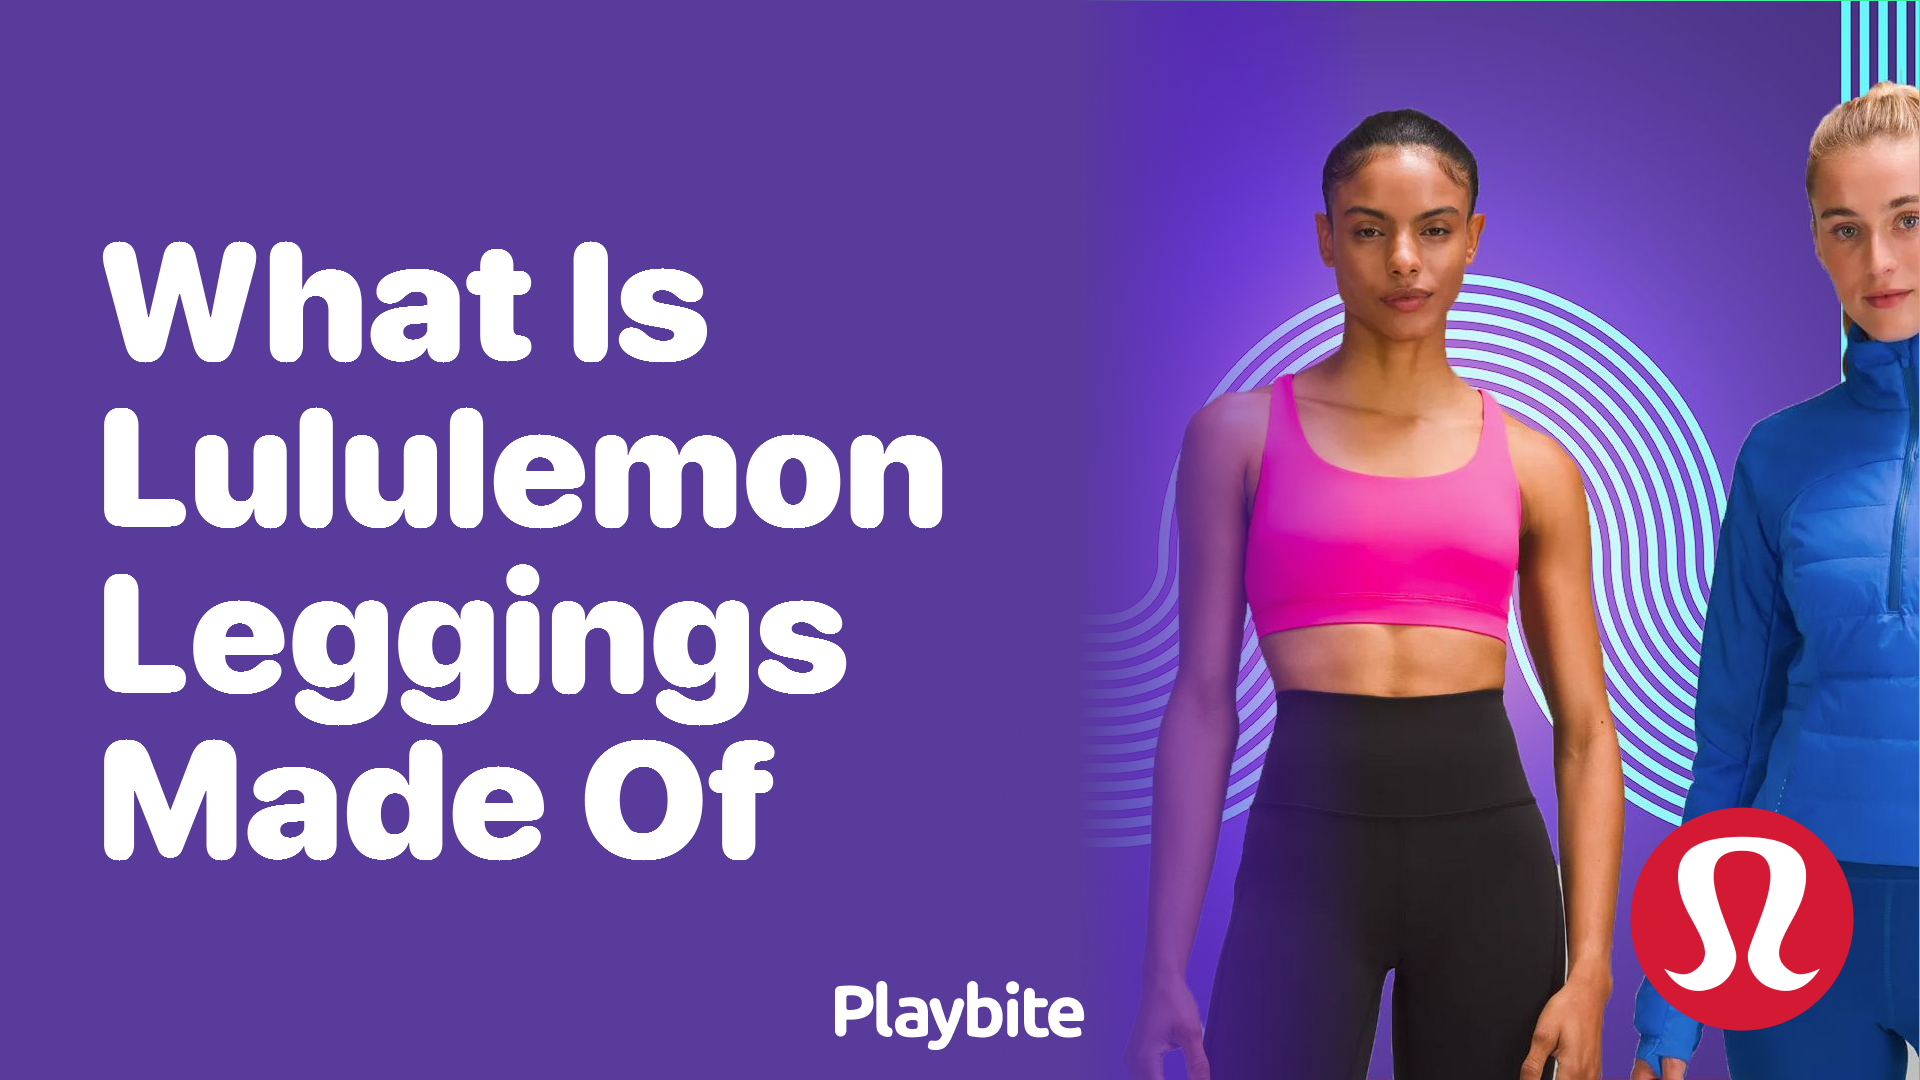 Which Lululemon Leggings Are Buttery Soft? Find Out Here! - Playbite